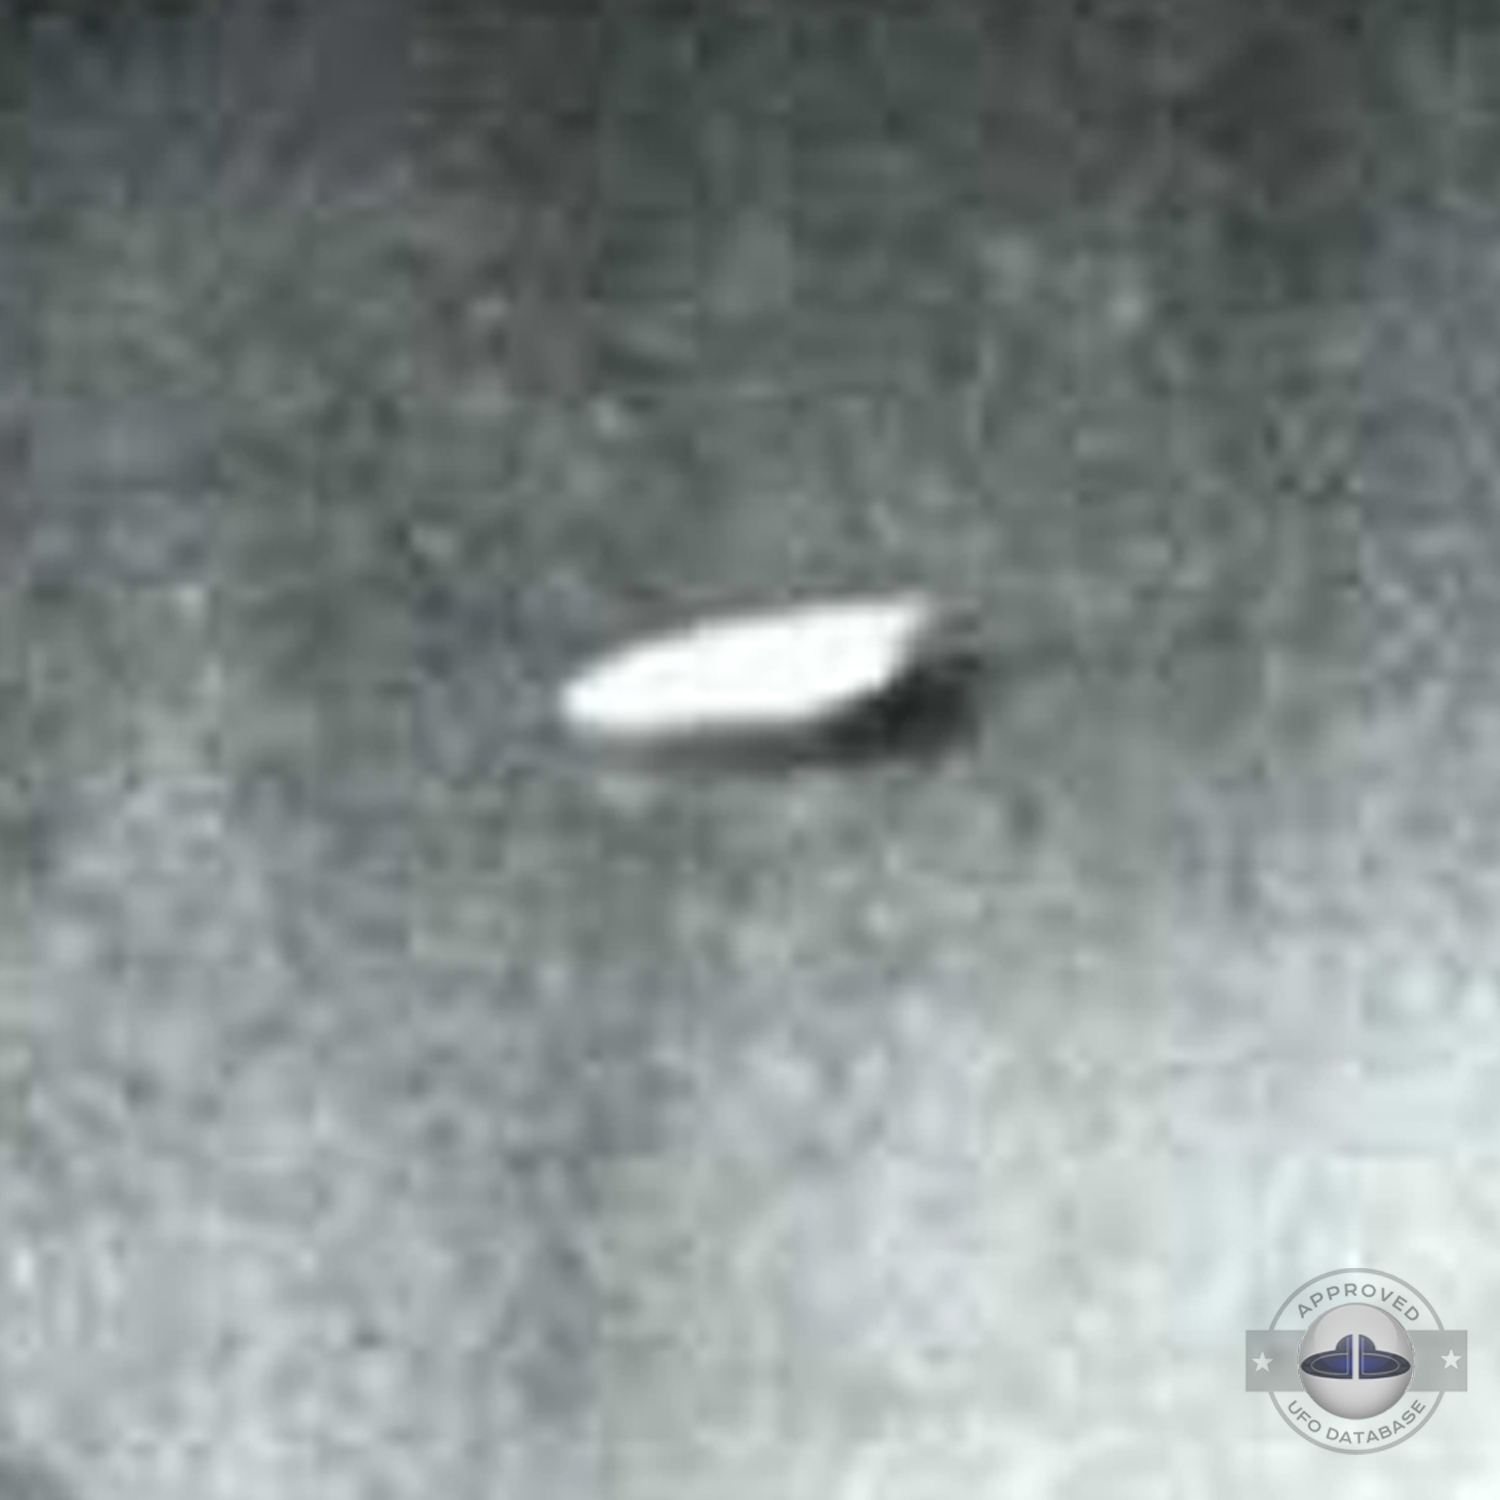 Very bright UFO with silver metal color making a strange noise | 1967 UFO Picture #139-4